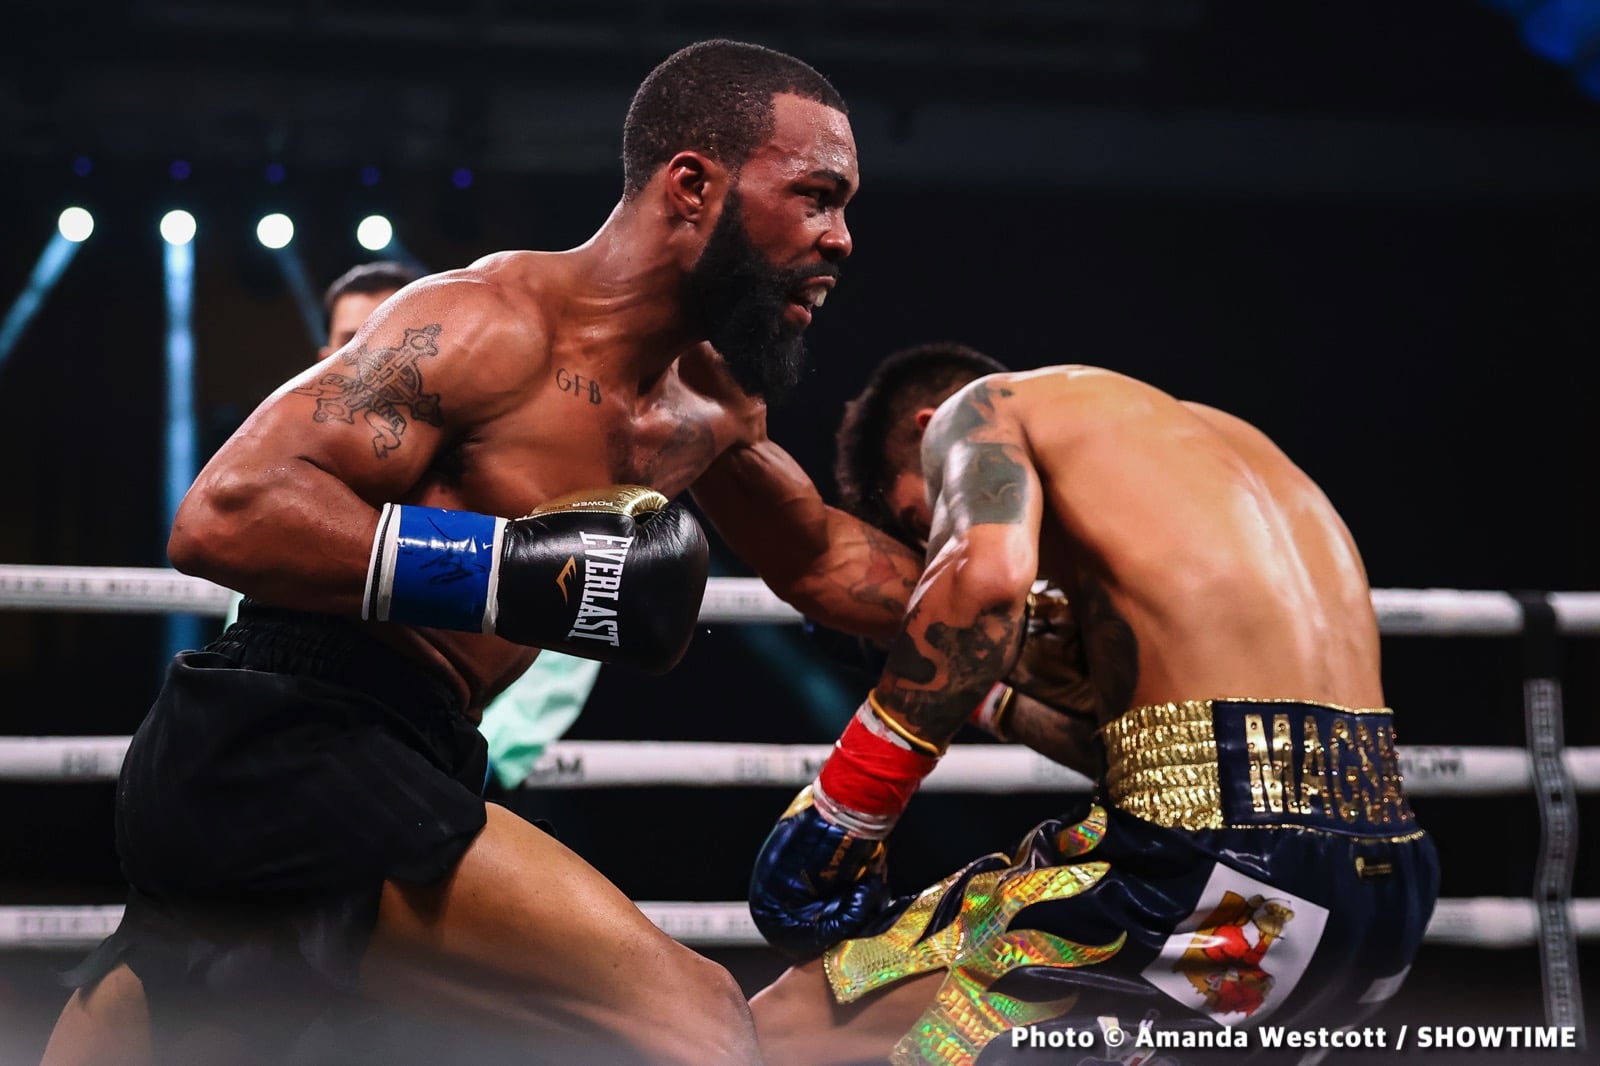 Image: Russell Jr. vs. Magsayo: "They Robbed Gary, he beat him with one hand," says Bozy Ennis